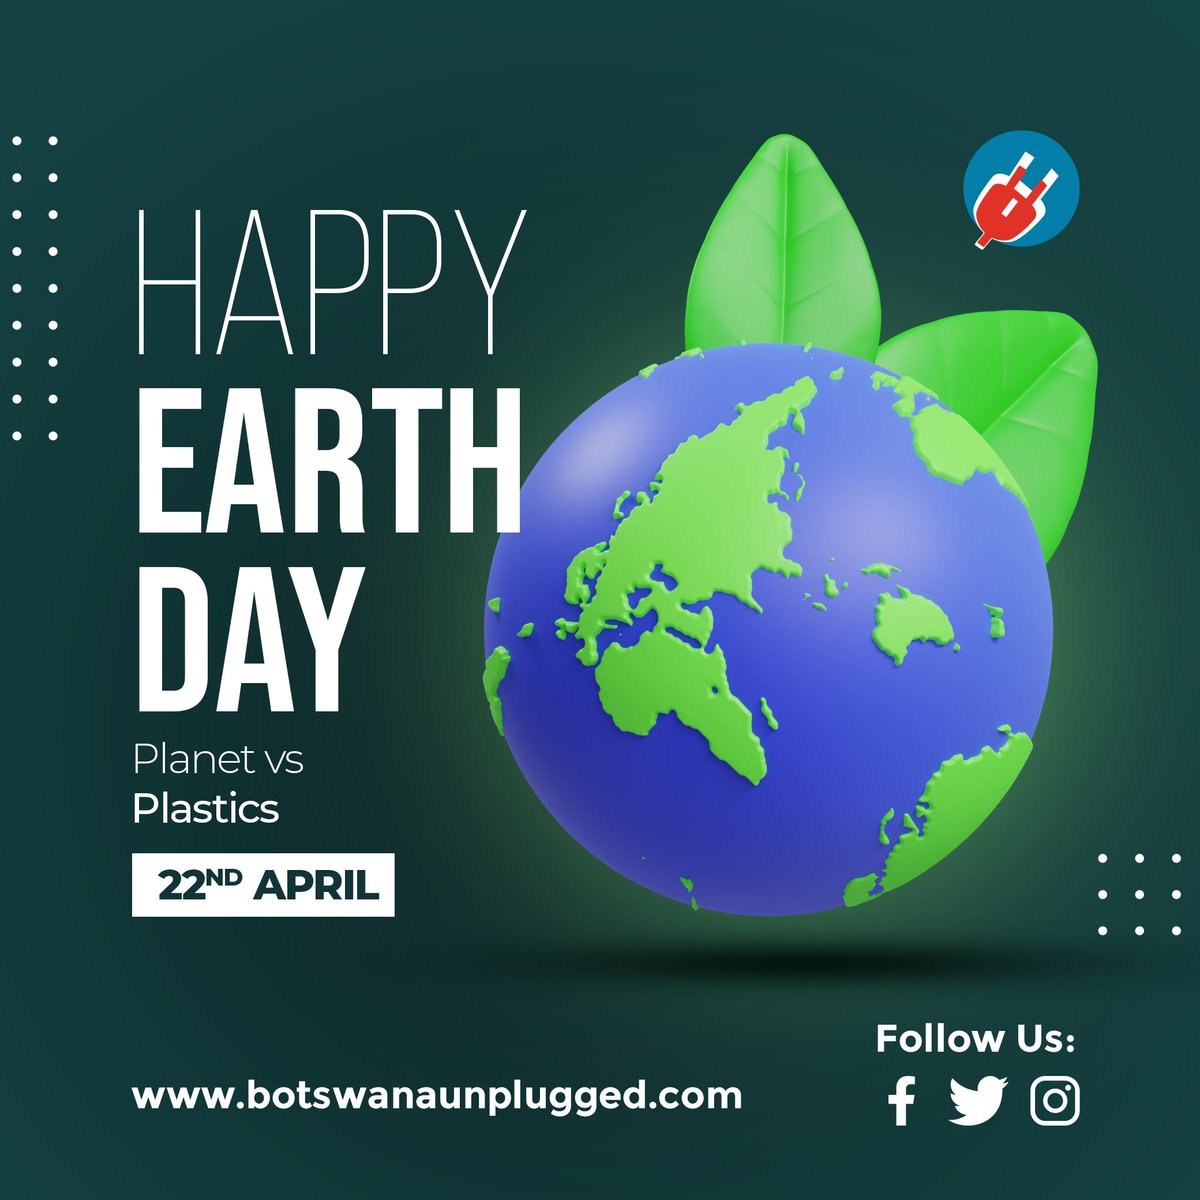 𝗧𝗵𝗿𝗼𝘄 𝗣𝗹𝗮𝘀𝘁𝗶𝗰𝘀 🚮𝗶𝗻 𝘁𝗵𝗲 𝗯𝗶𝗻, 𝗘𝗮𝗿𝘁𝗵 𝘄𝗶𝗻𝘀🌍💪🏾~Mother earth continuously cares for us with beautiful trees, vegetation and the animals around it. How do we reward it? by committing to a plastic free future. #earthday #PlanetVsPlastics #SaveMotherEarth…